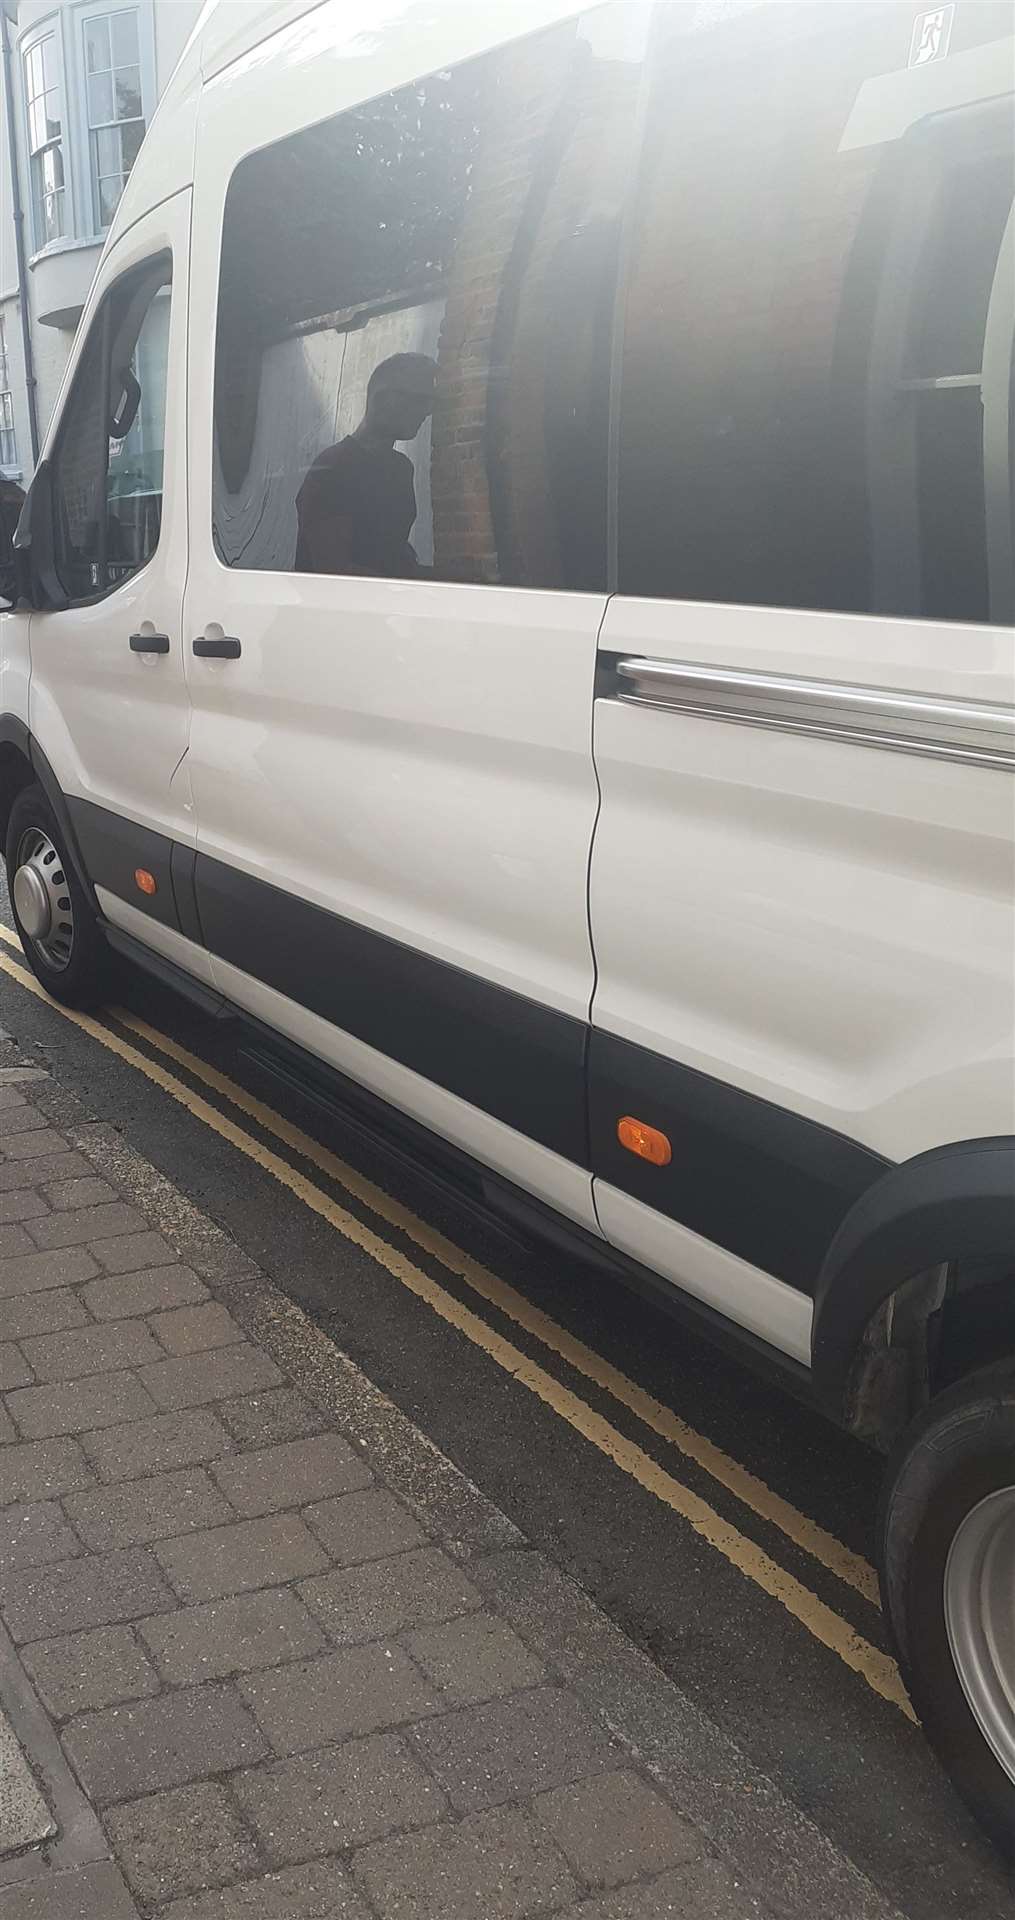 Parked on double yellow lines